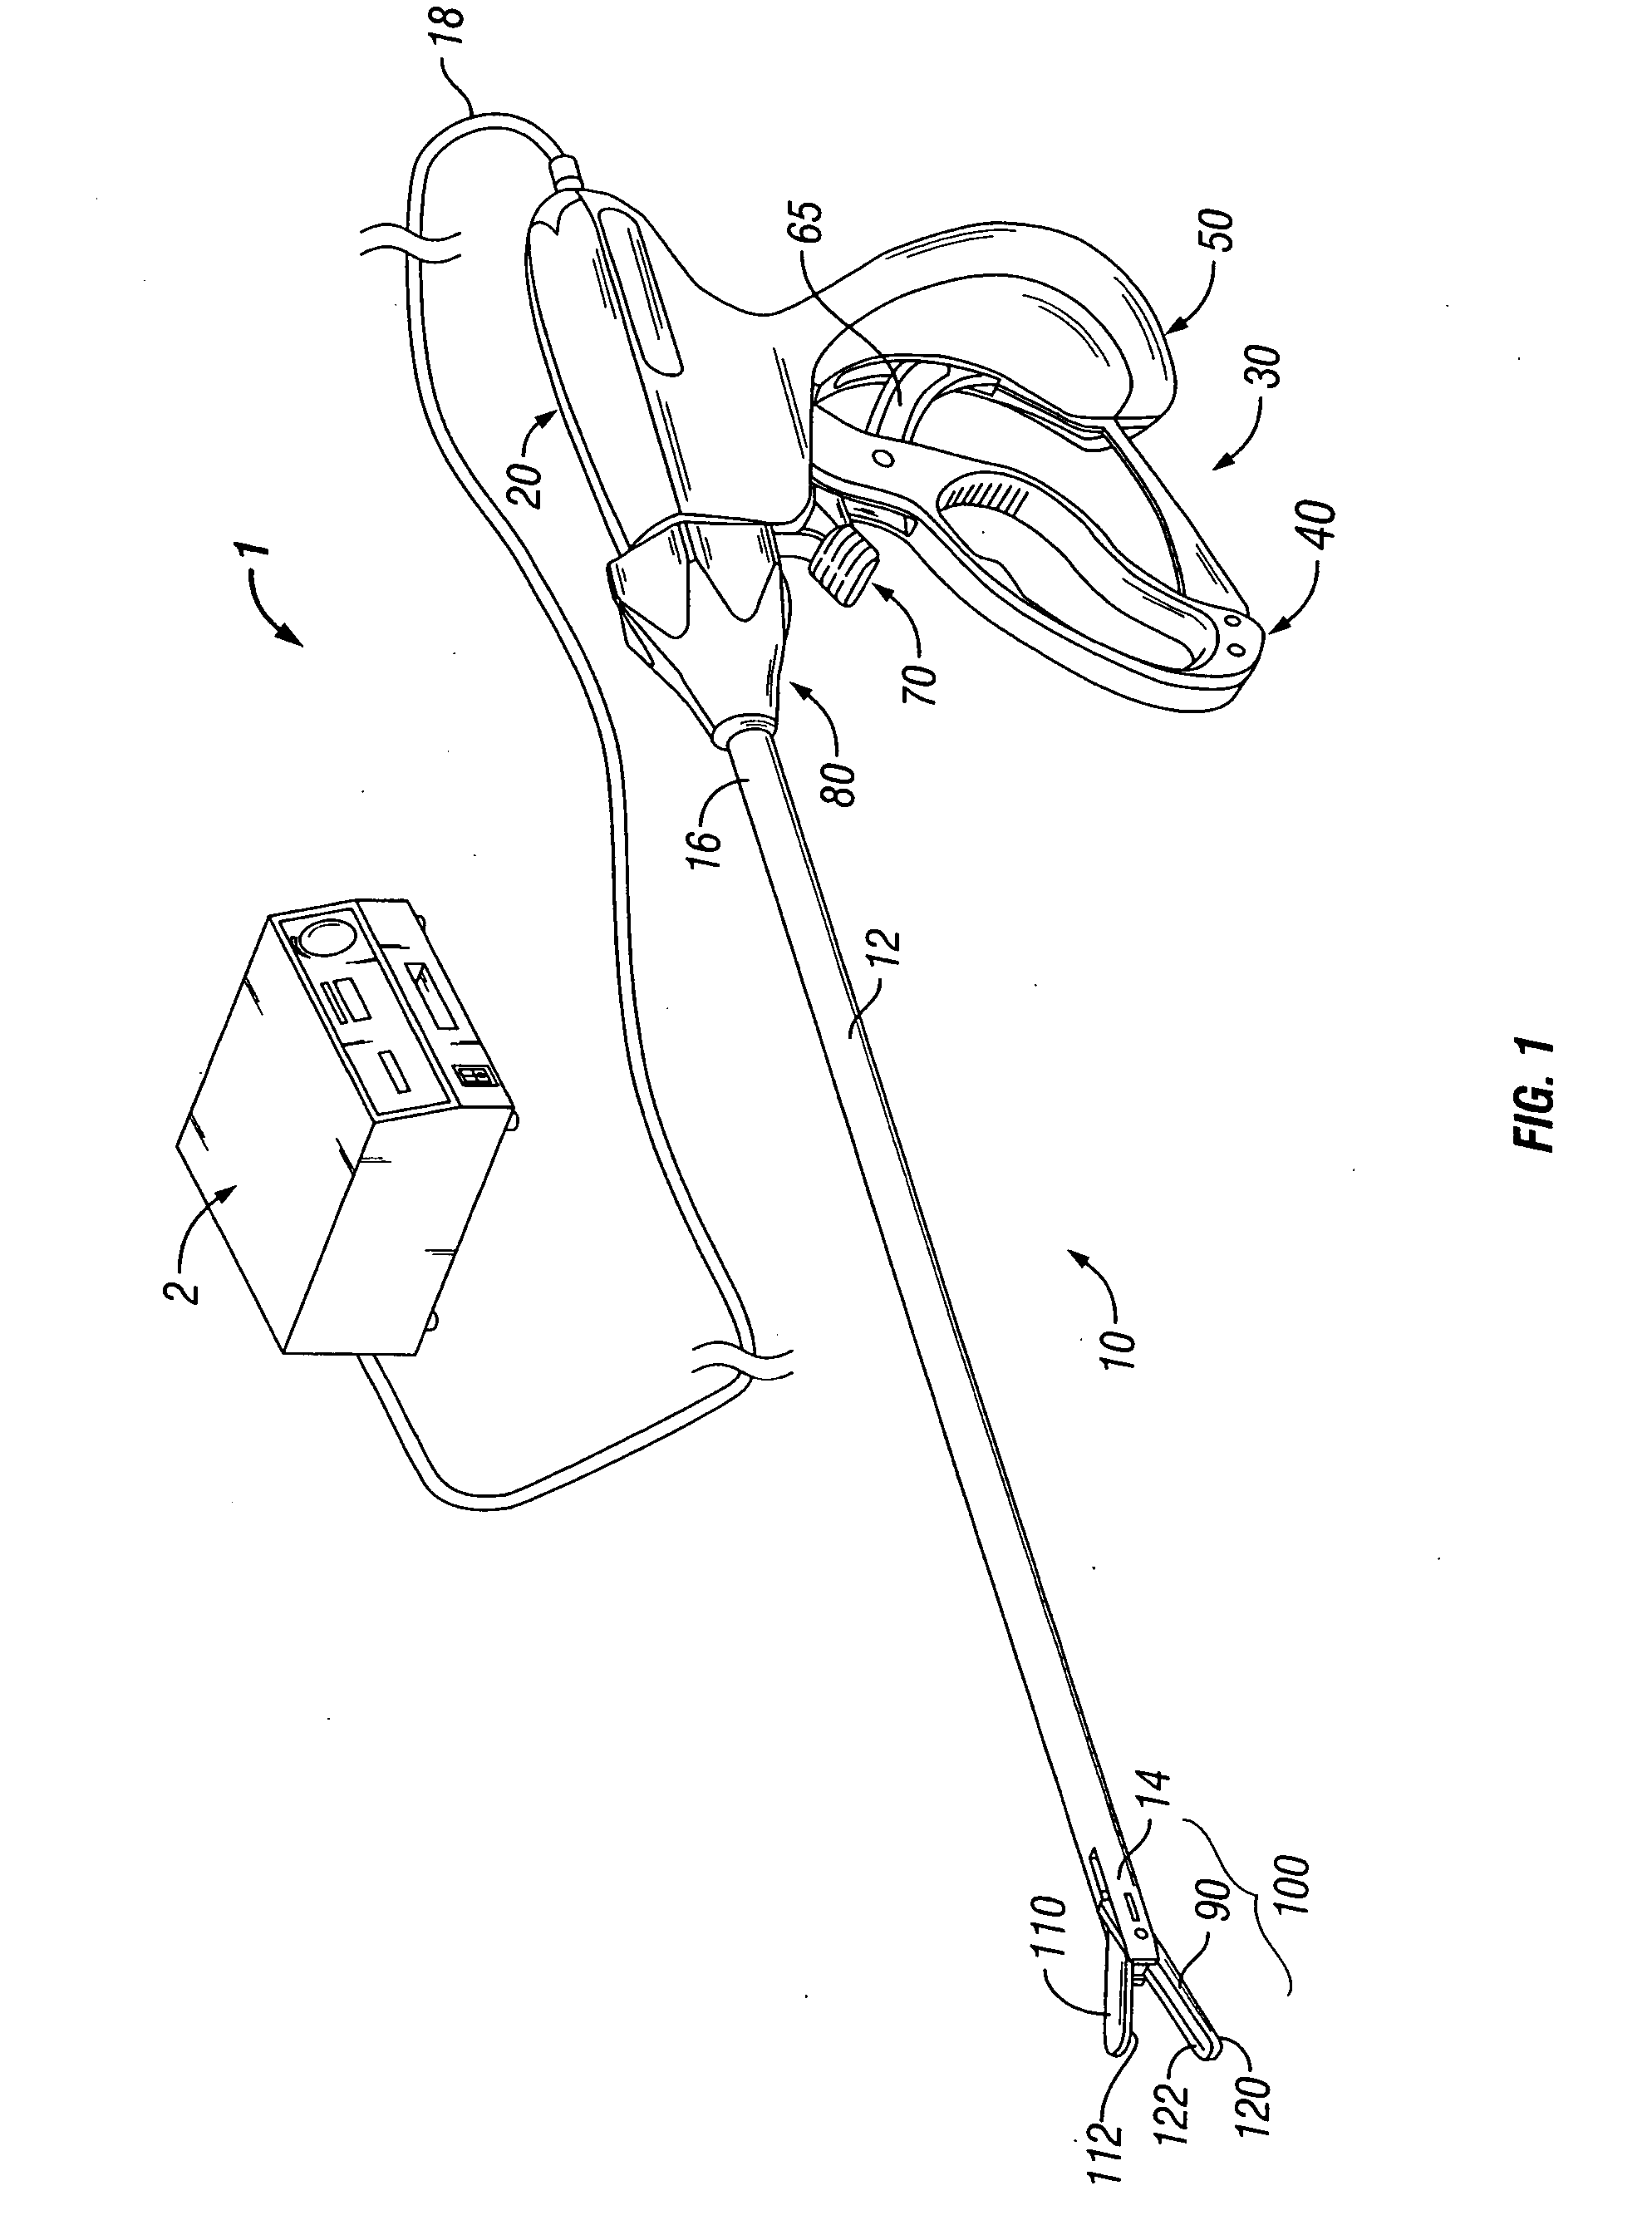 System and method for tissue sealing